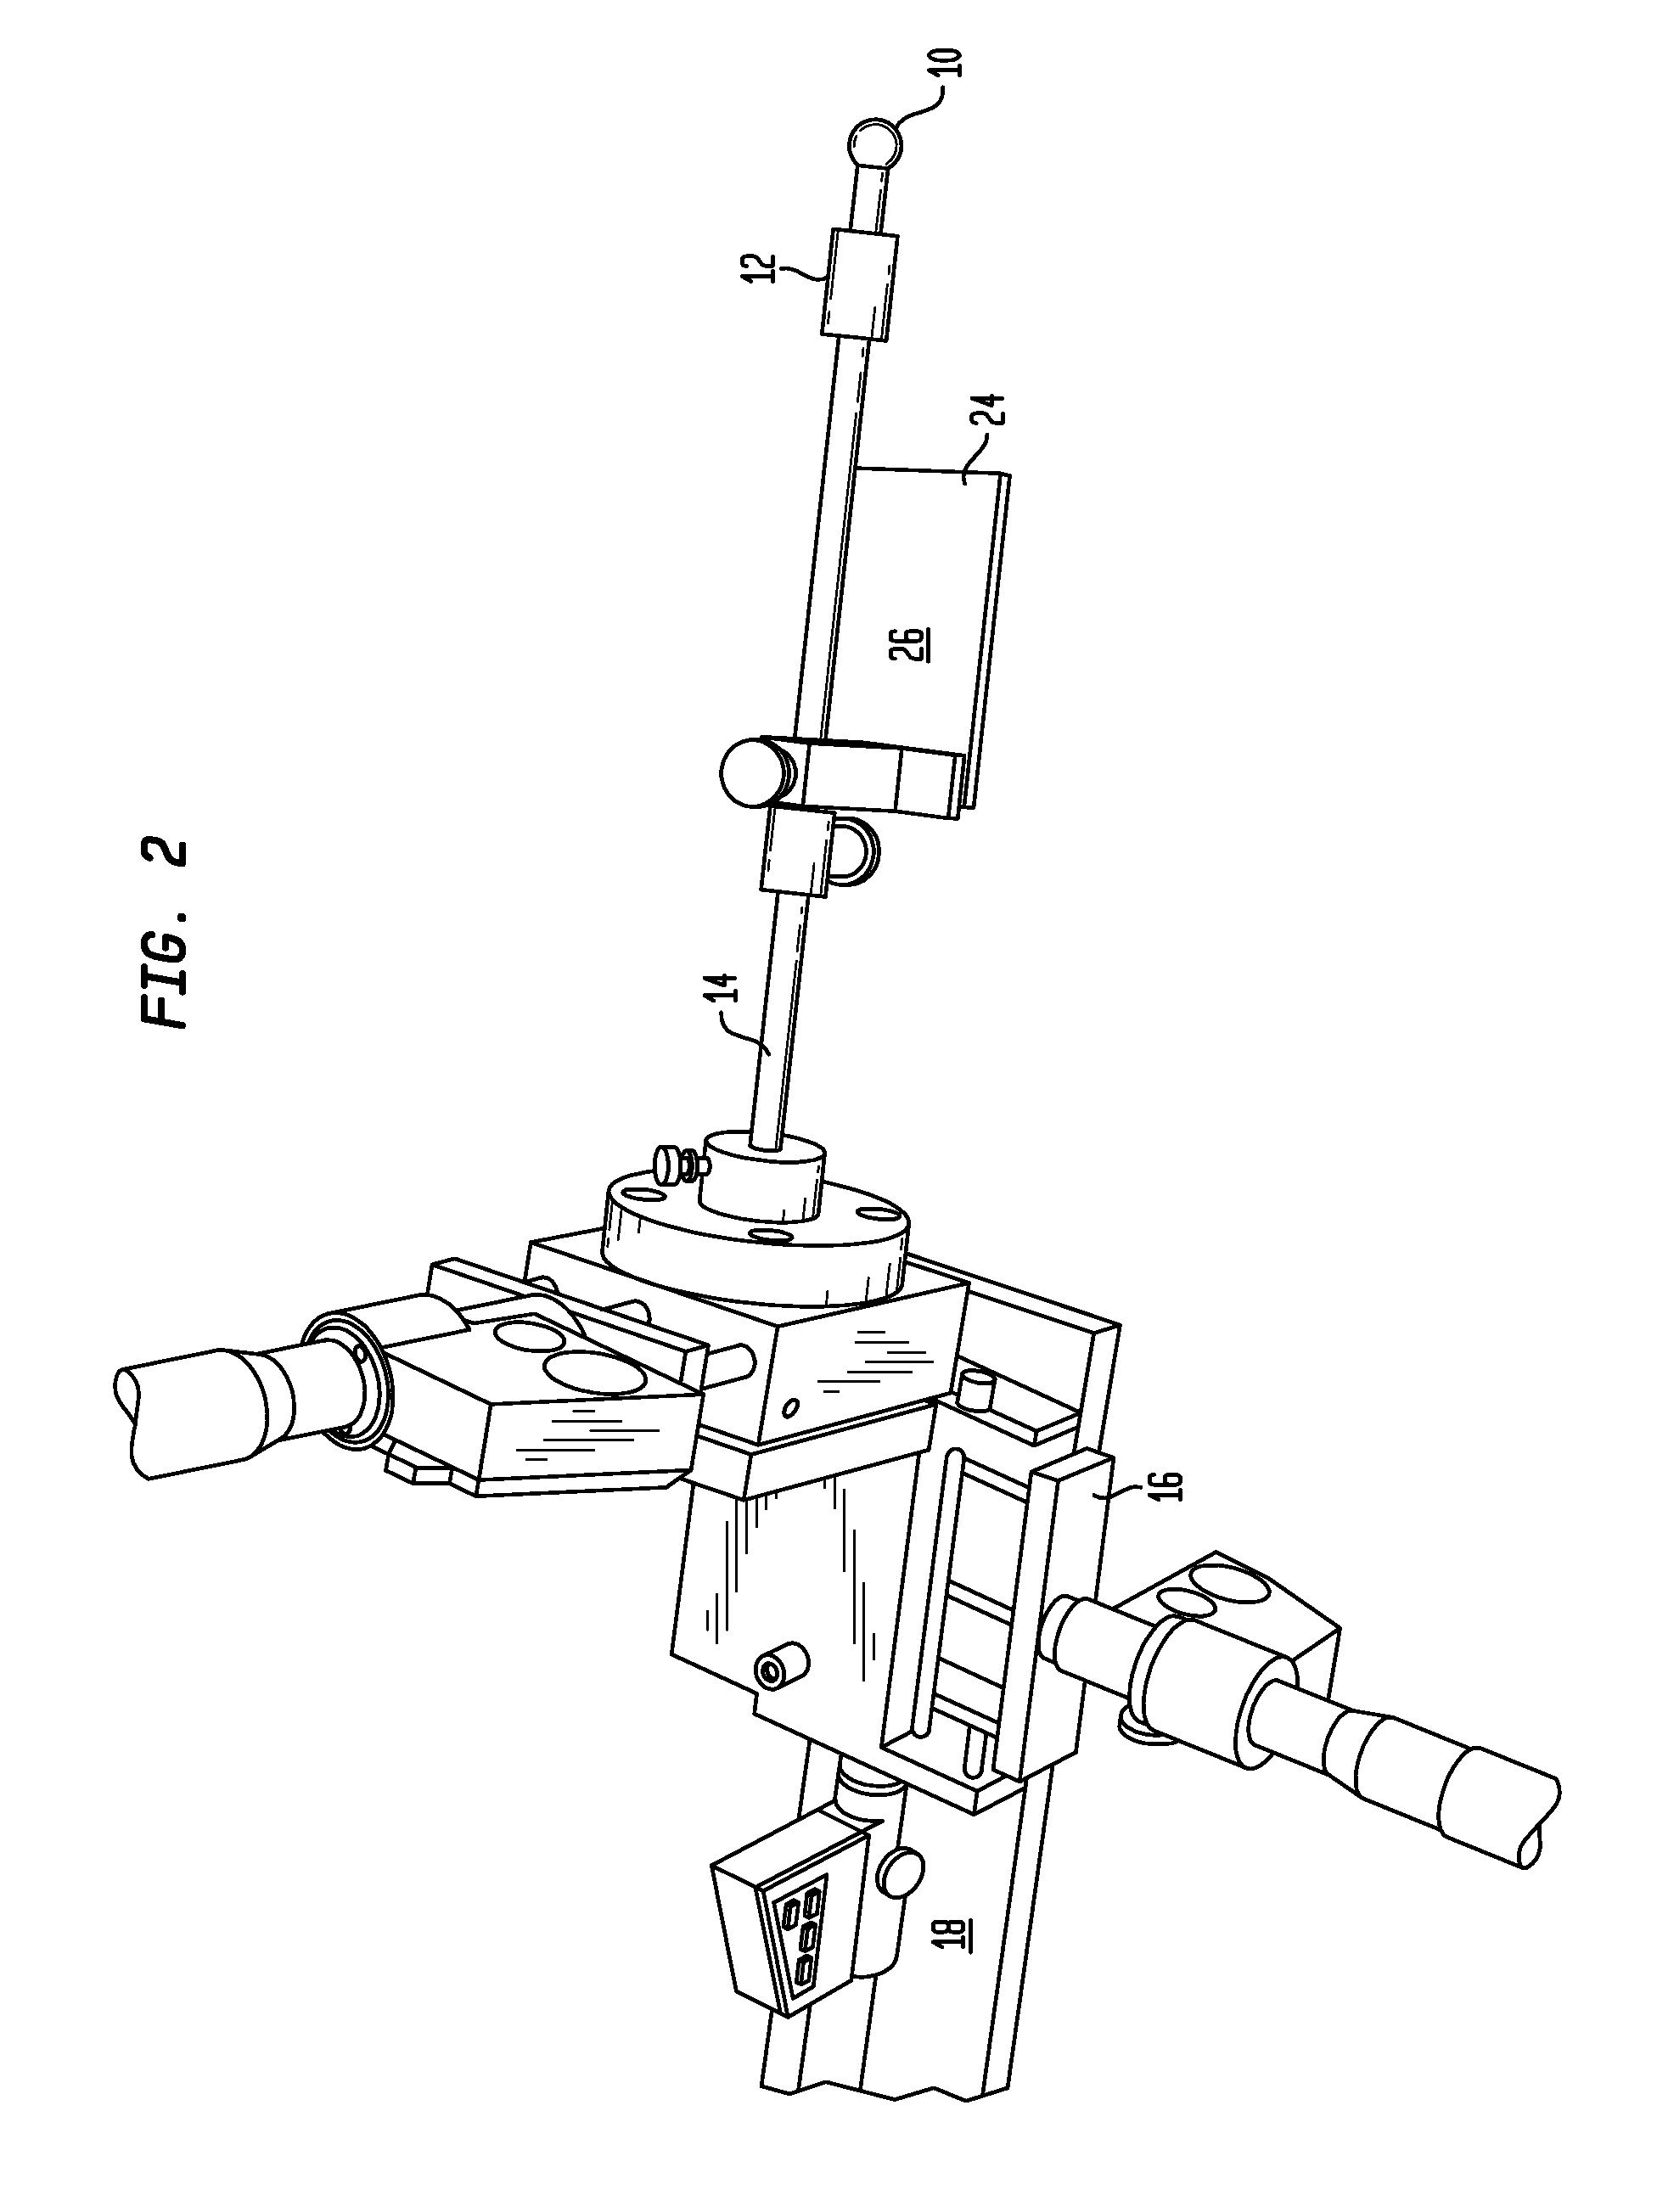 Quality-control jig for use with radiotherapy apparatus